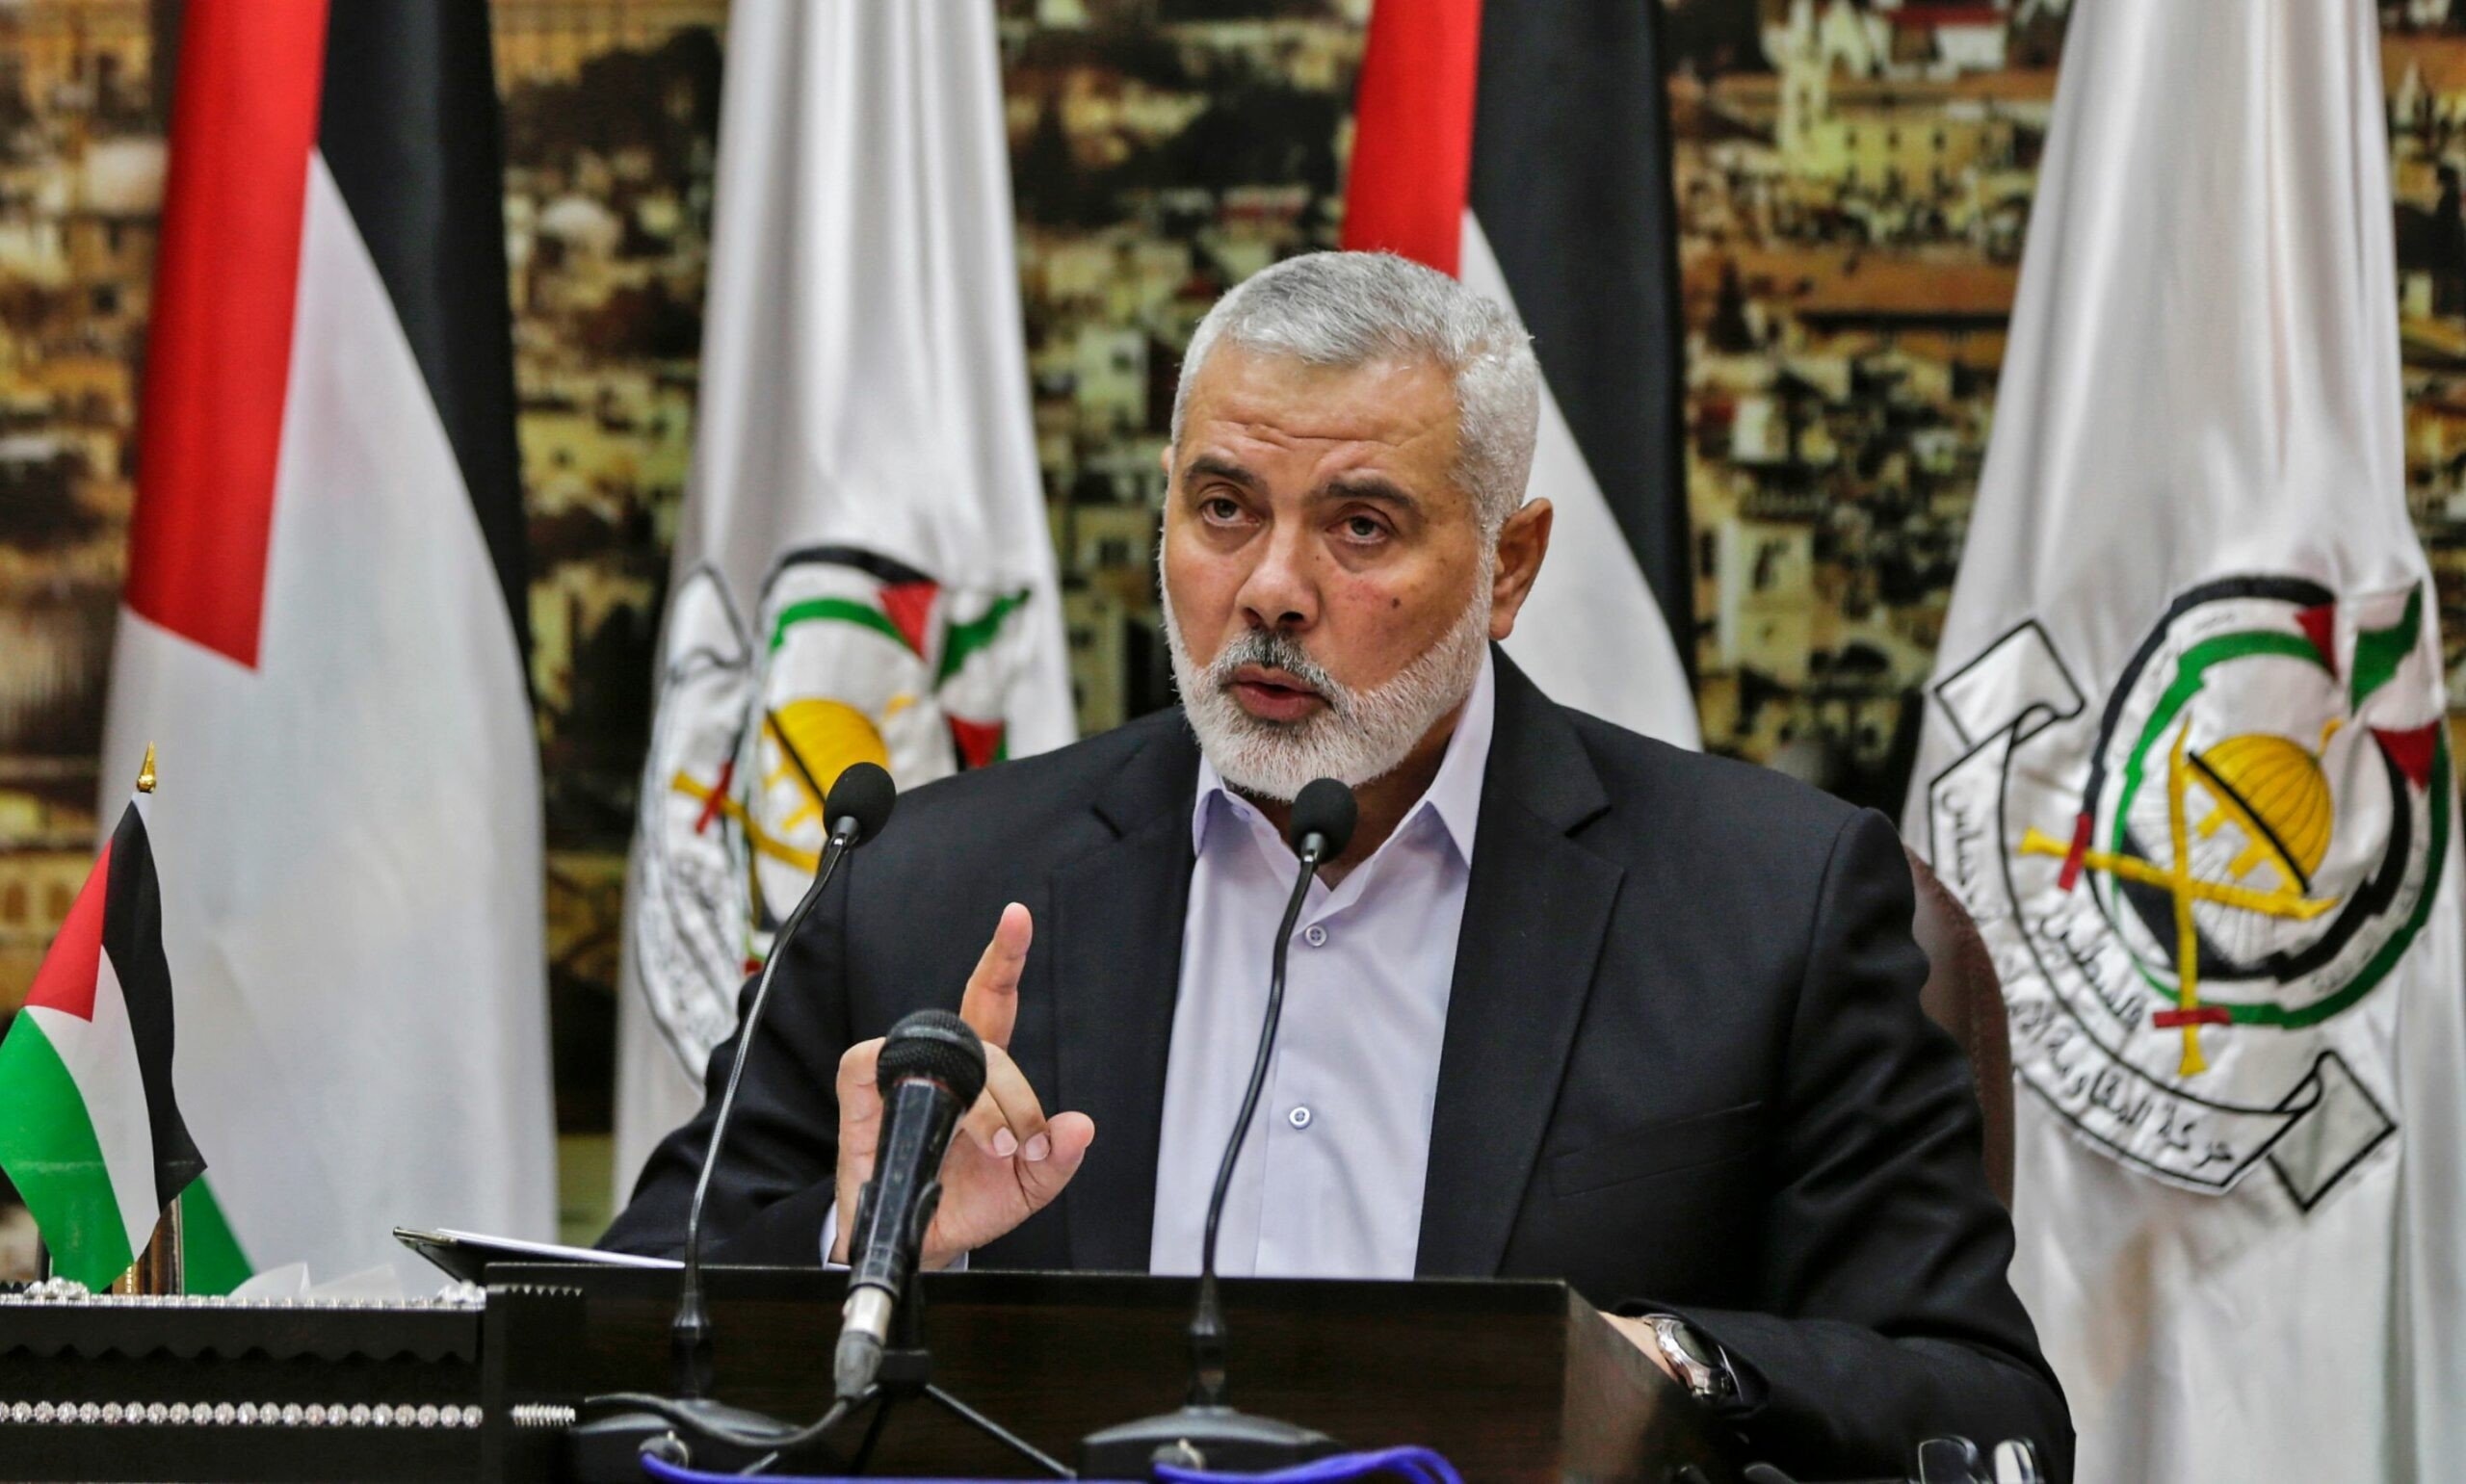 A “heinous crime”: Qatar strongly condemns assassination of Hamas political chief Ismail Haniyeh